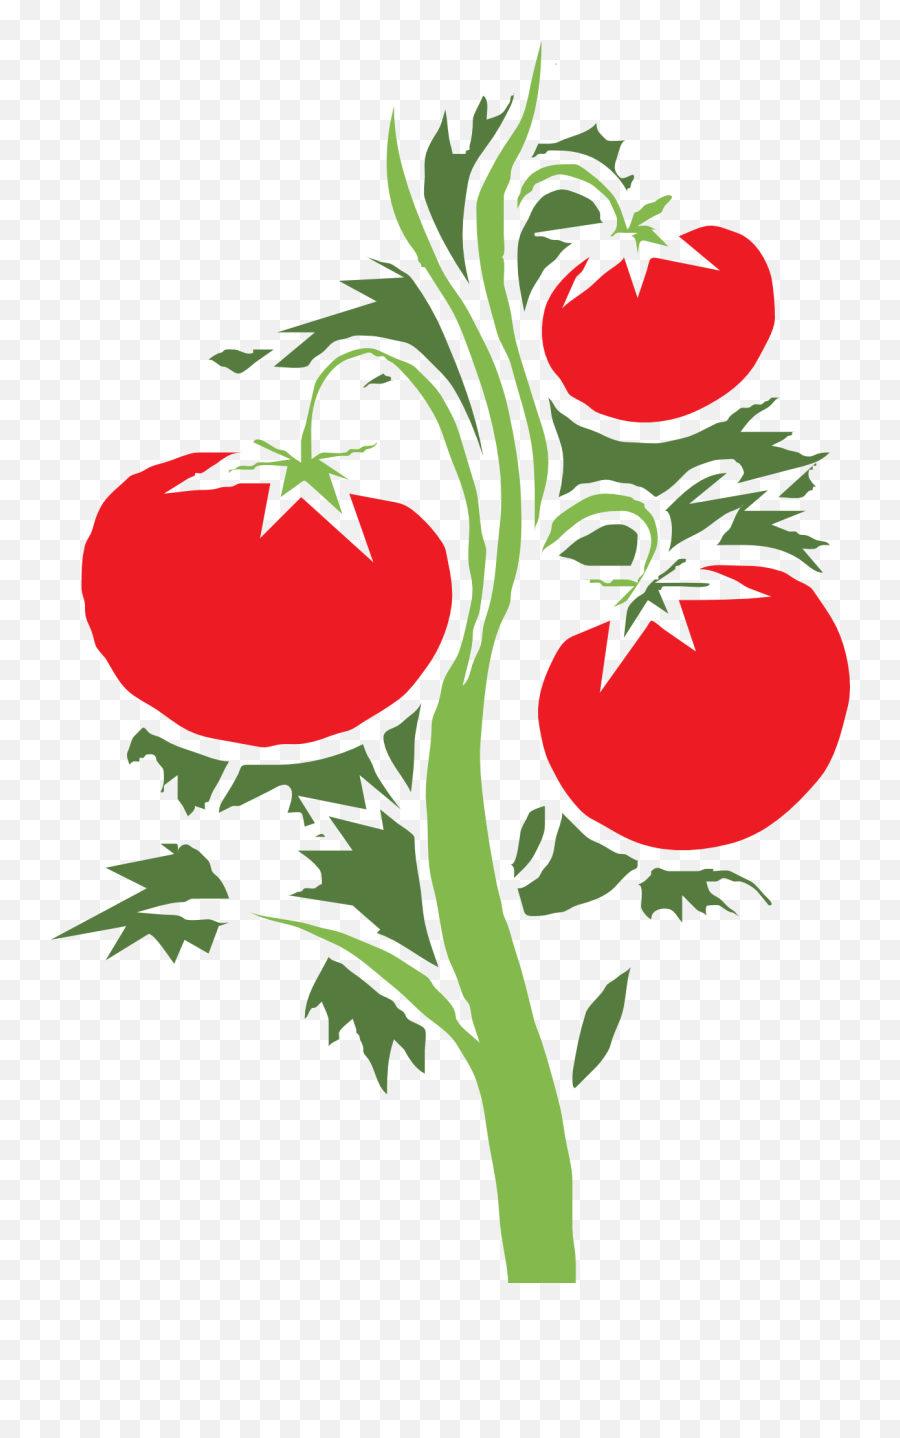 Tomato Clip Leaf Transparent U0026 Png Clipart Free Download - Ywd Tomato Plant Vector Png,Tomato Clipart Png